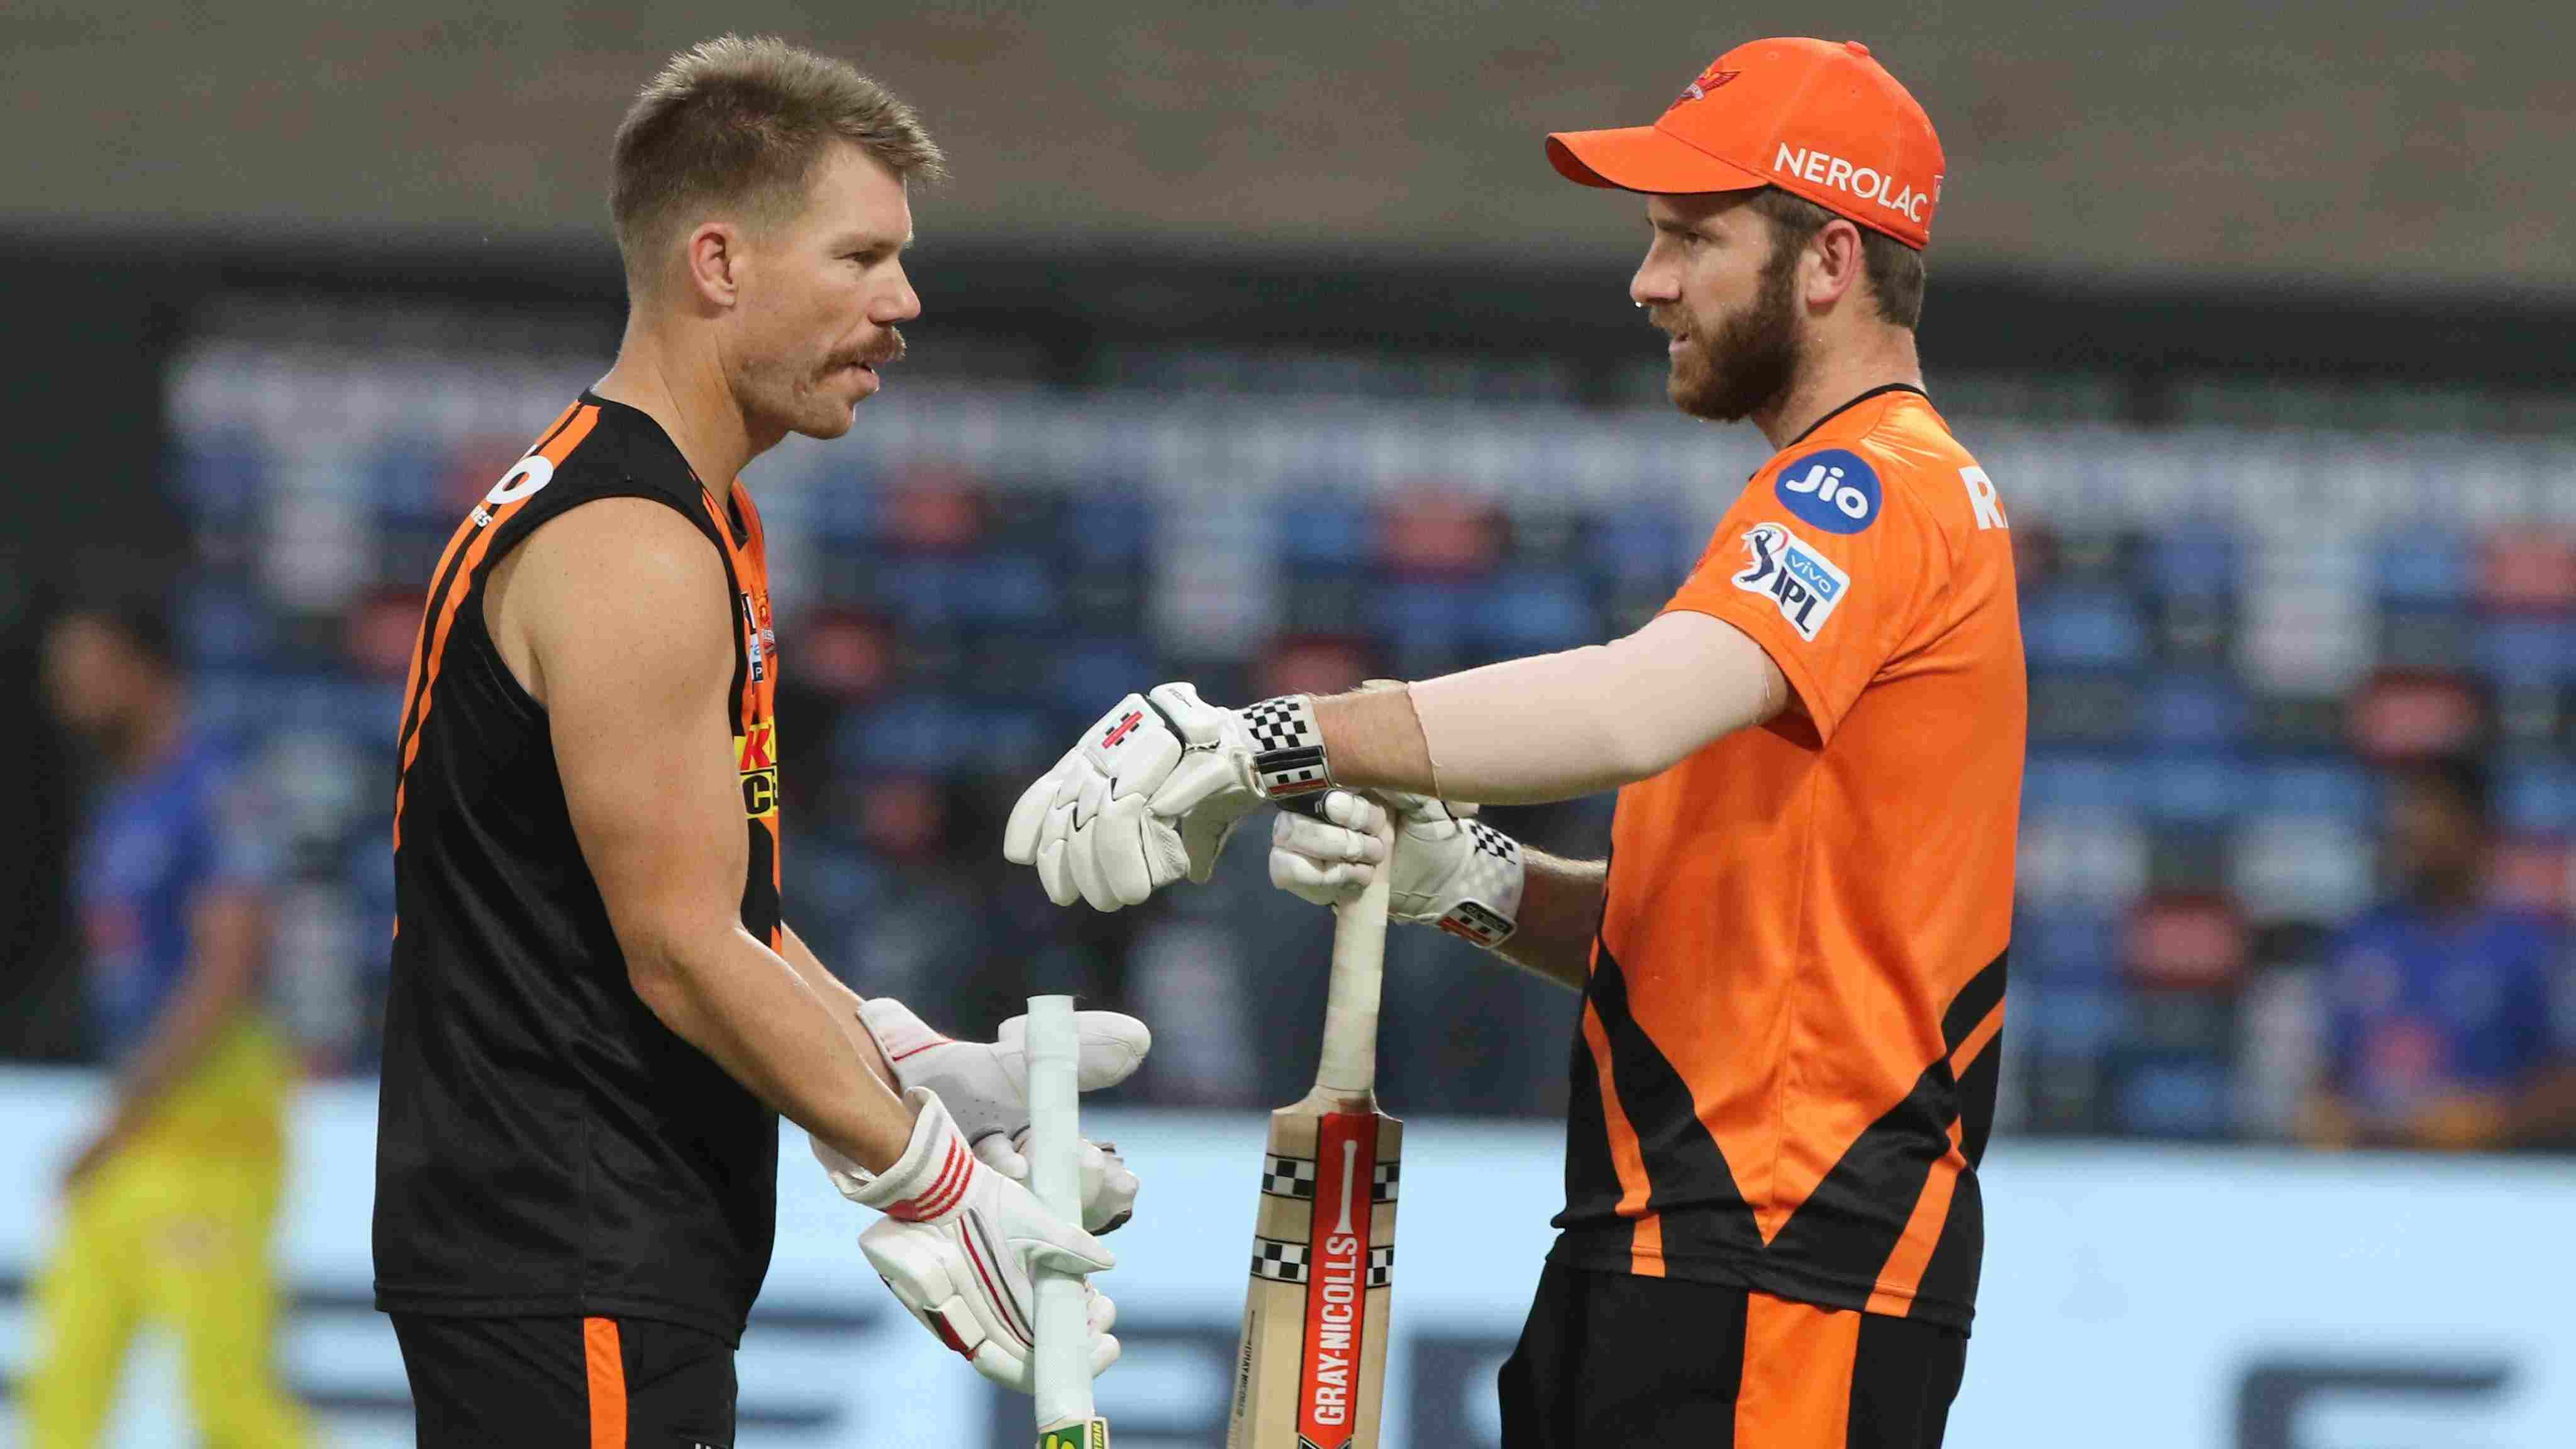 IPL 2021: A look at Sunrisers Hyderabad's report card in first leg 